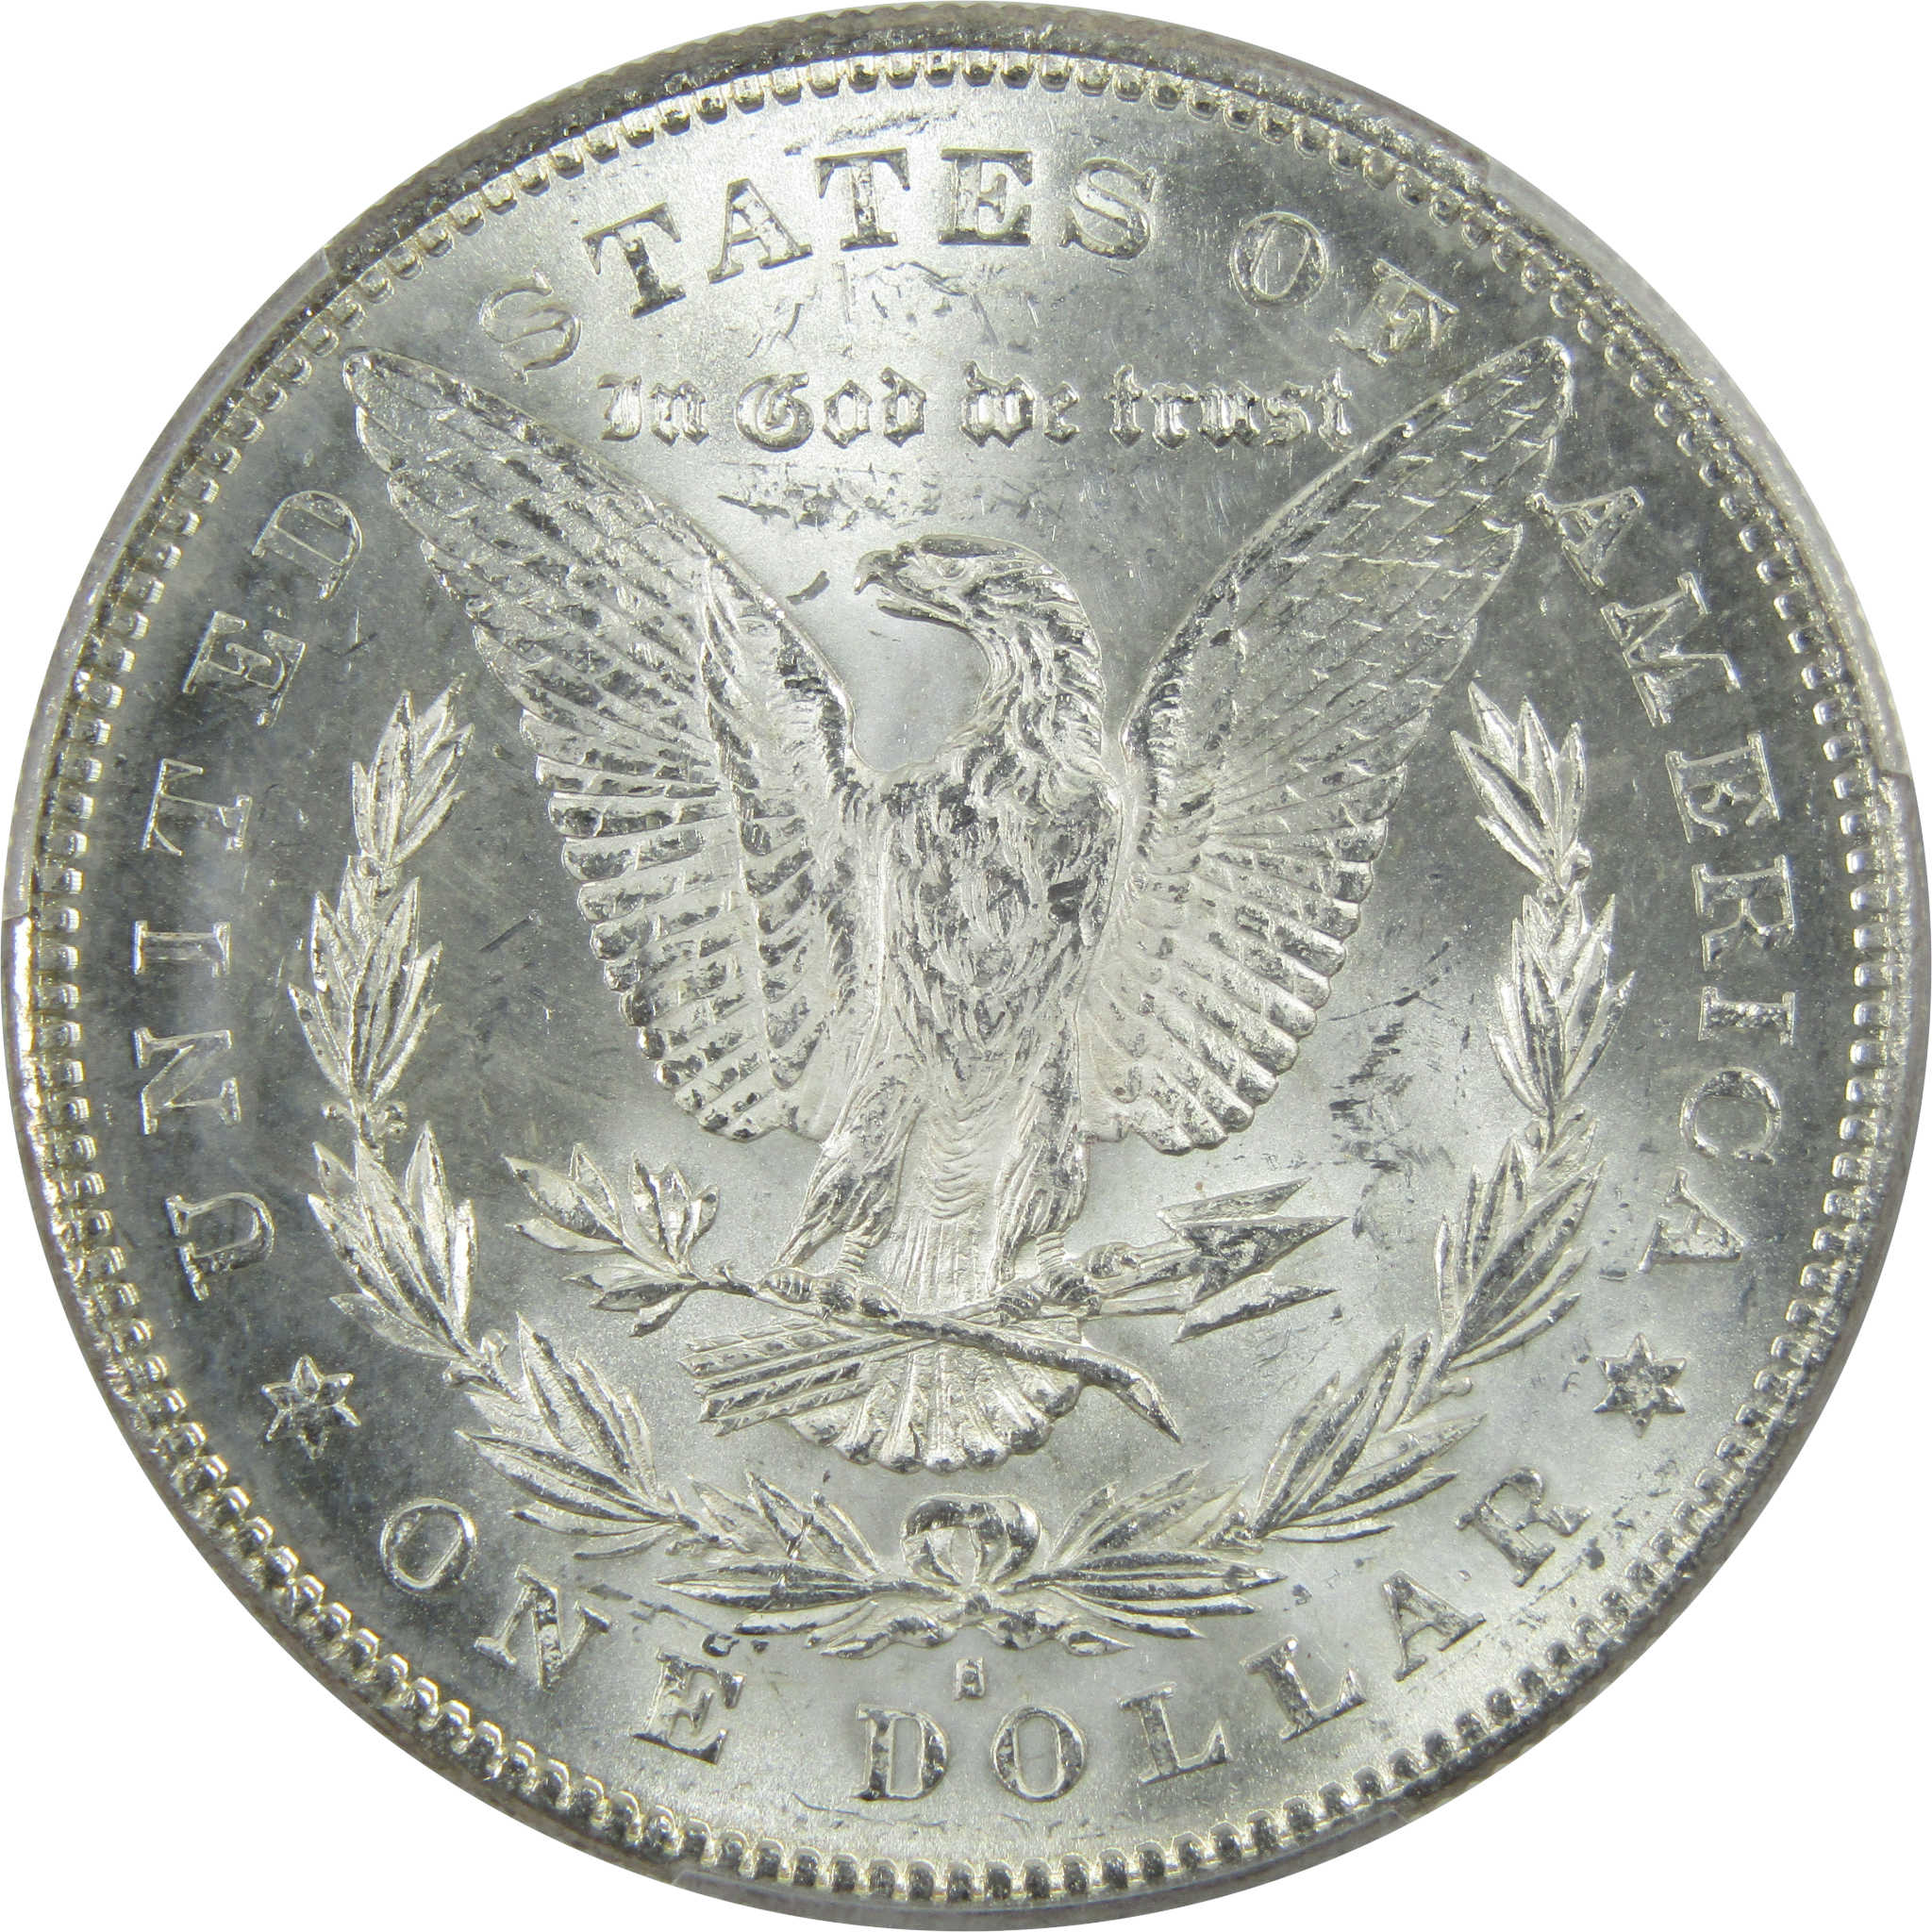 1878 S Morgan Dollar MS 64 PCGS Silver $1 Uncirculated Coin SKU:I13392 - Morgan coin - Morgan silver dollar - Morgan silver dollar for sale - Profile Coins &amp; Collectibles